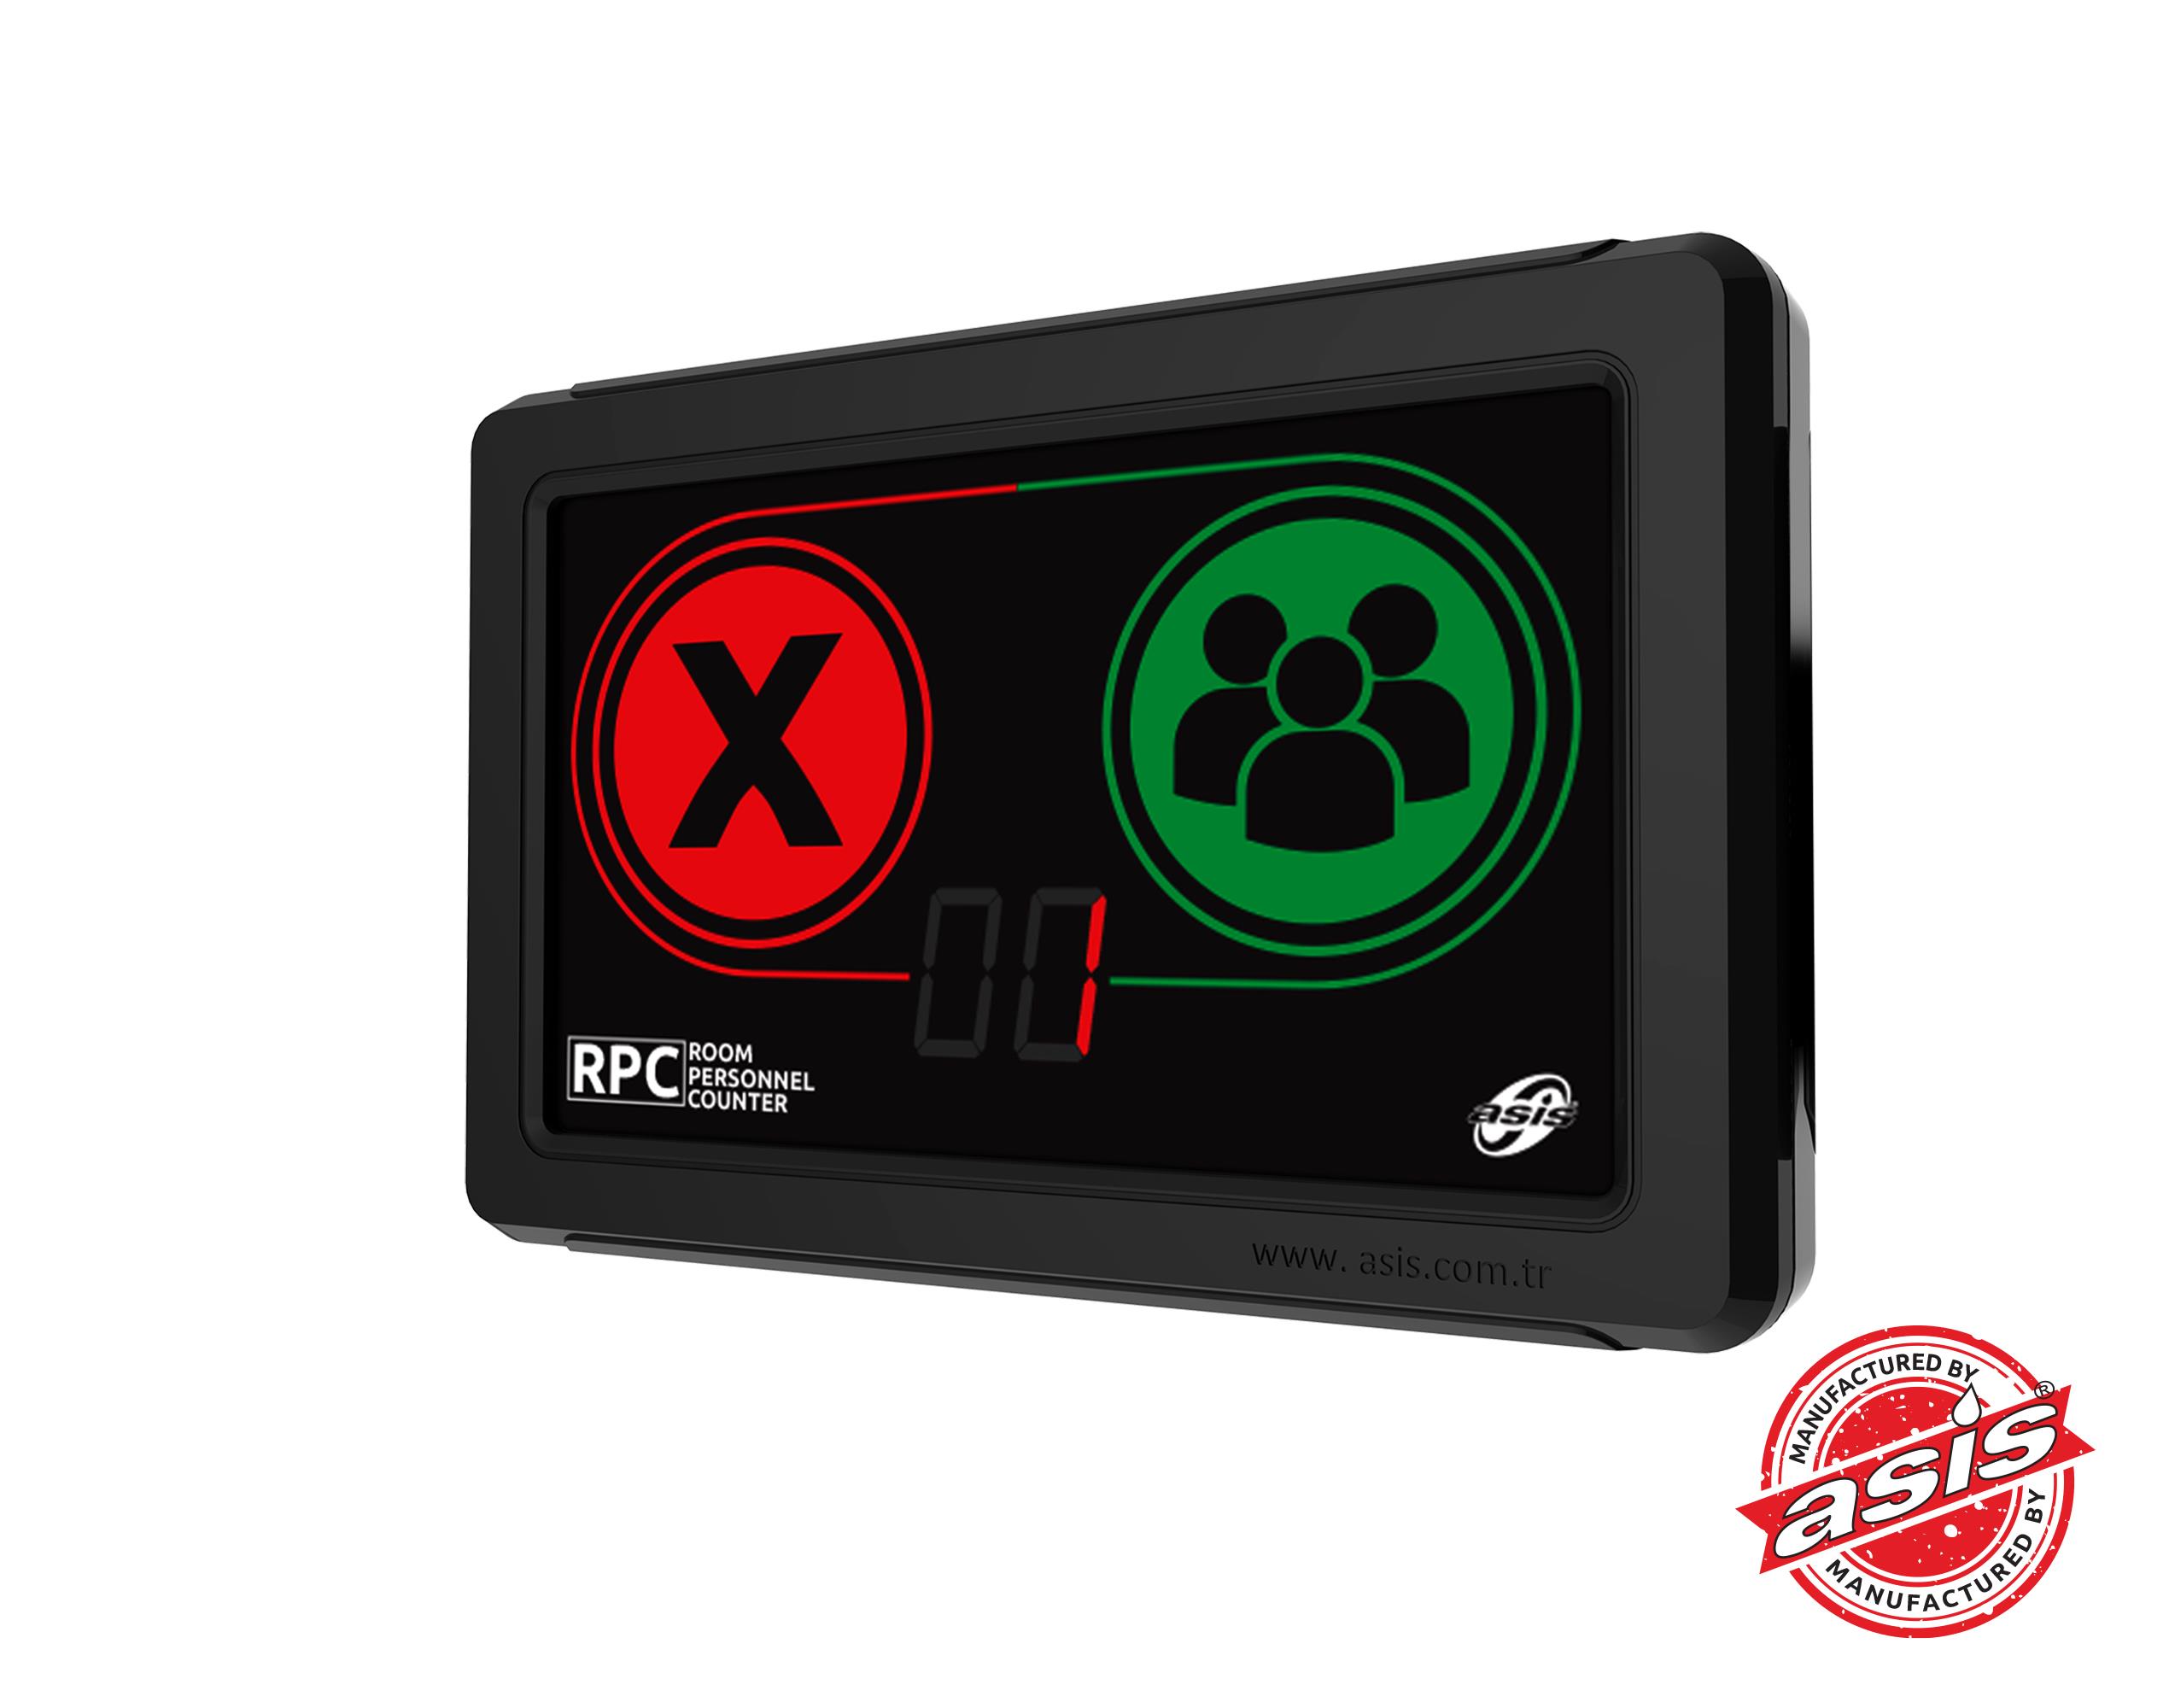 RPC Room Personnel Counting System panel